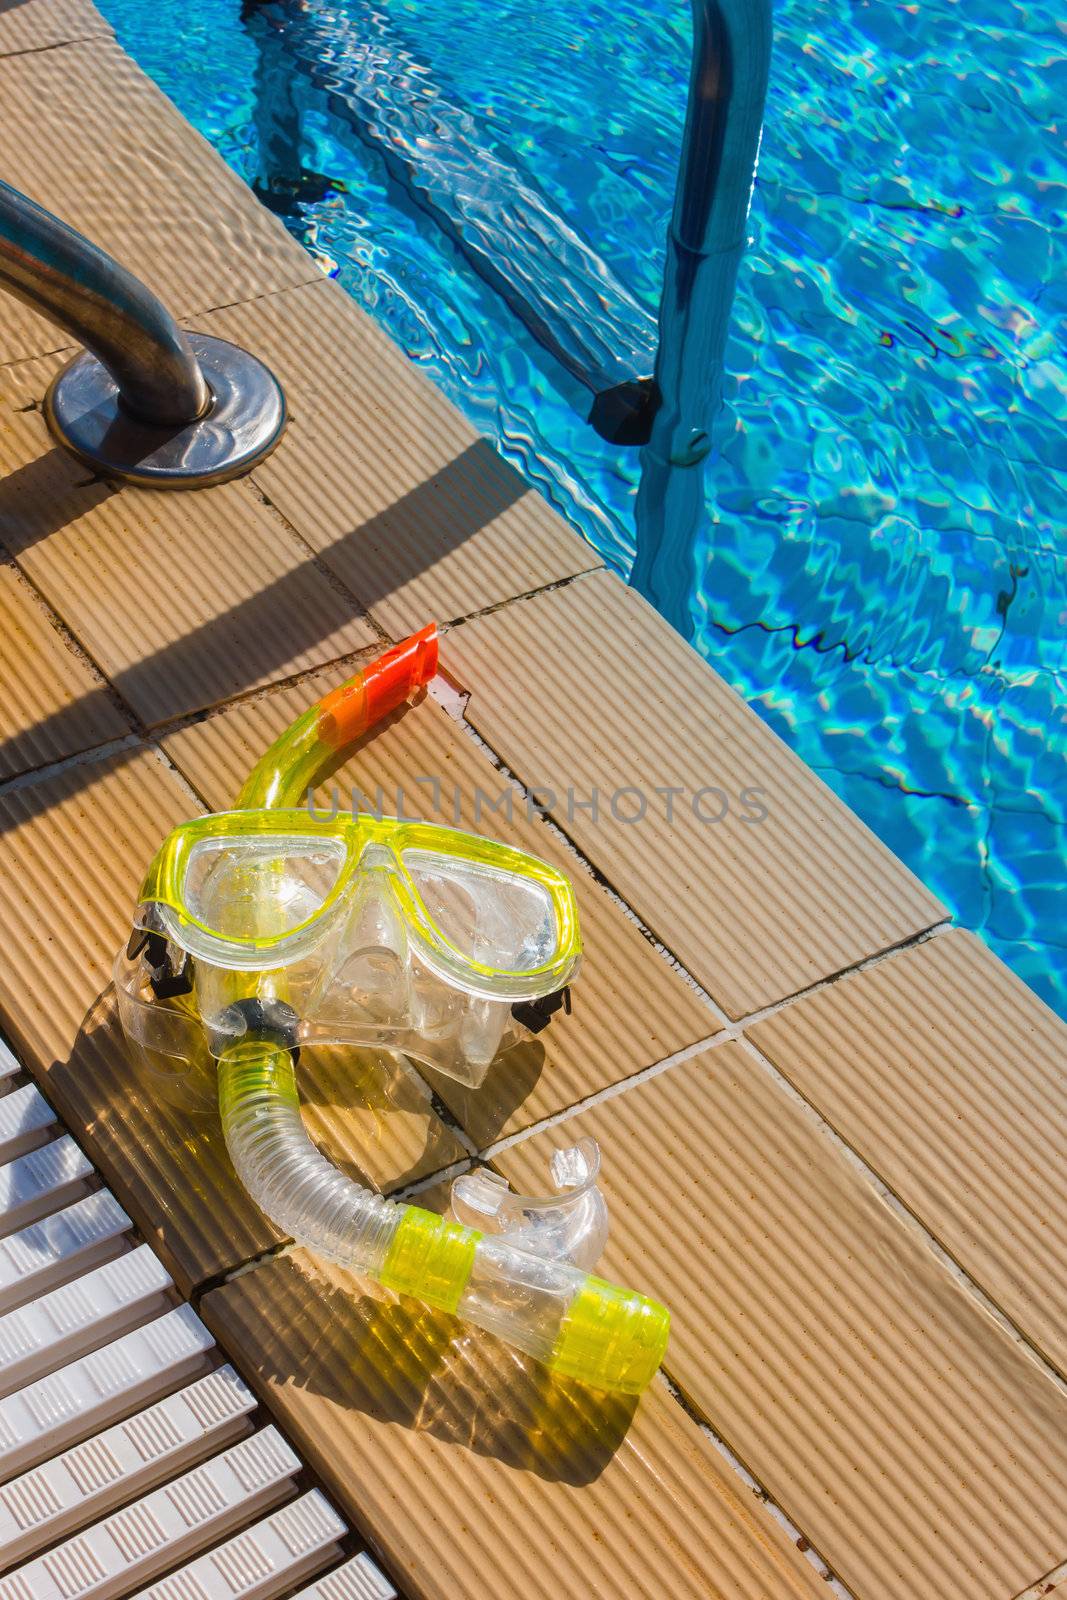 Mask and snorkel for diving near the swimming pool